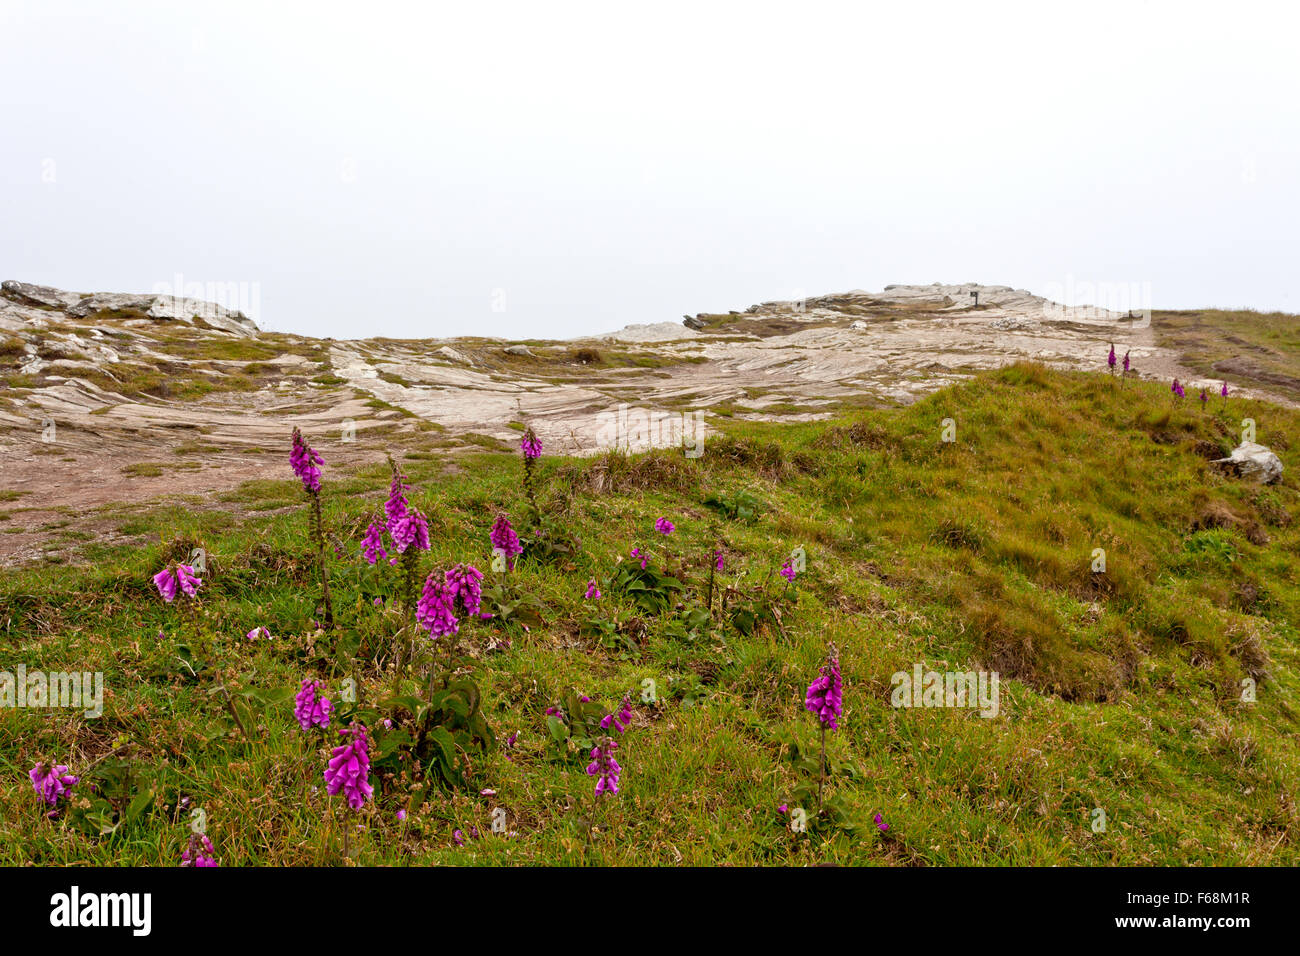 The Old Devonian slate strata and wild foxgloves at the summit of Tintagel Castle ruins (English Heritage) Cornwall, England, UK Stock Photo